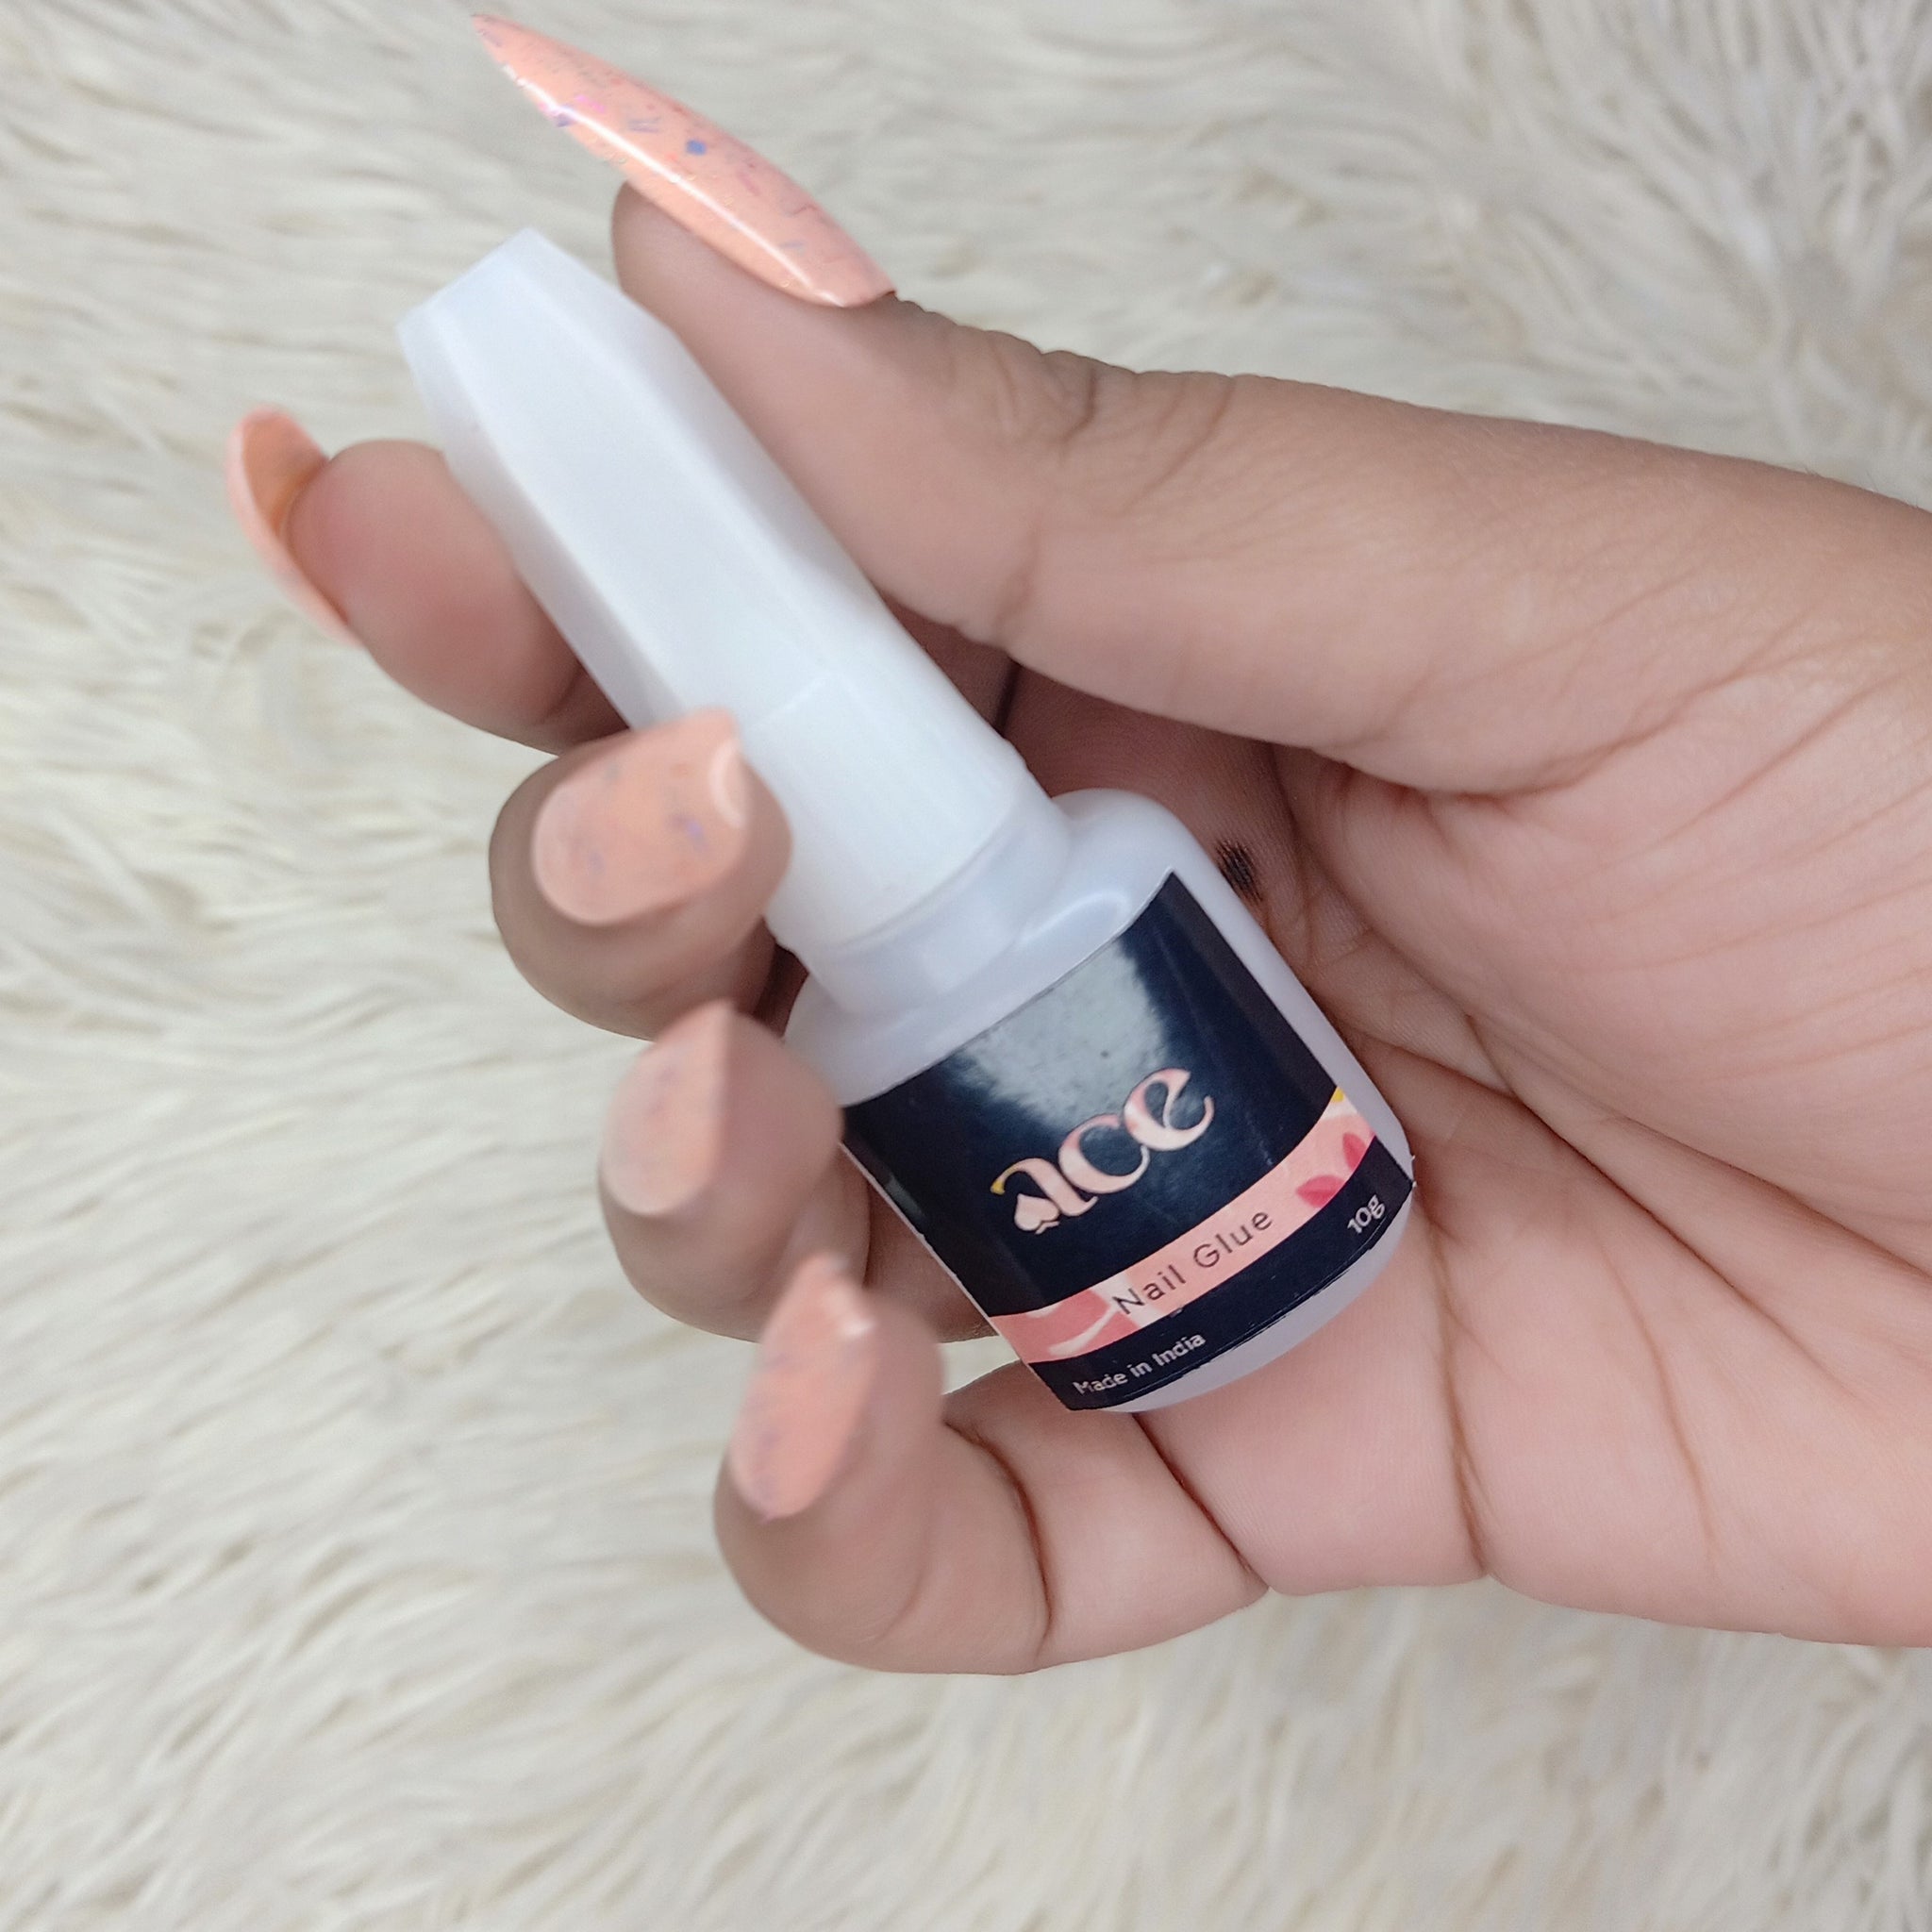 Is Nail Glue Bad For Your Nails? [Avoid Nail Damage]